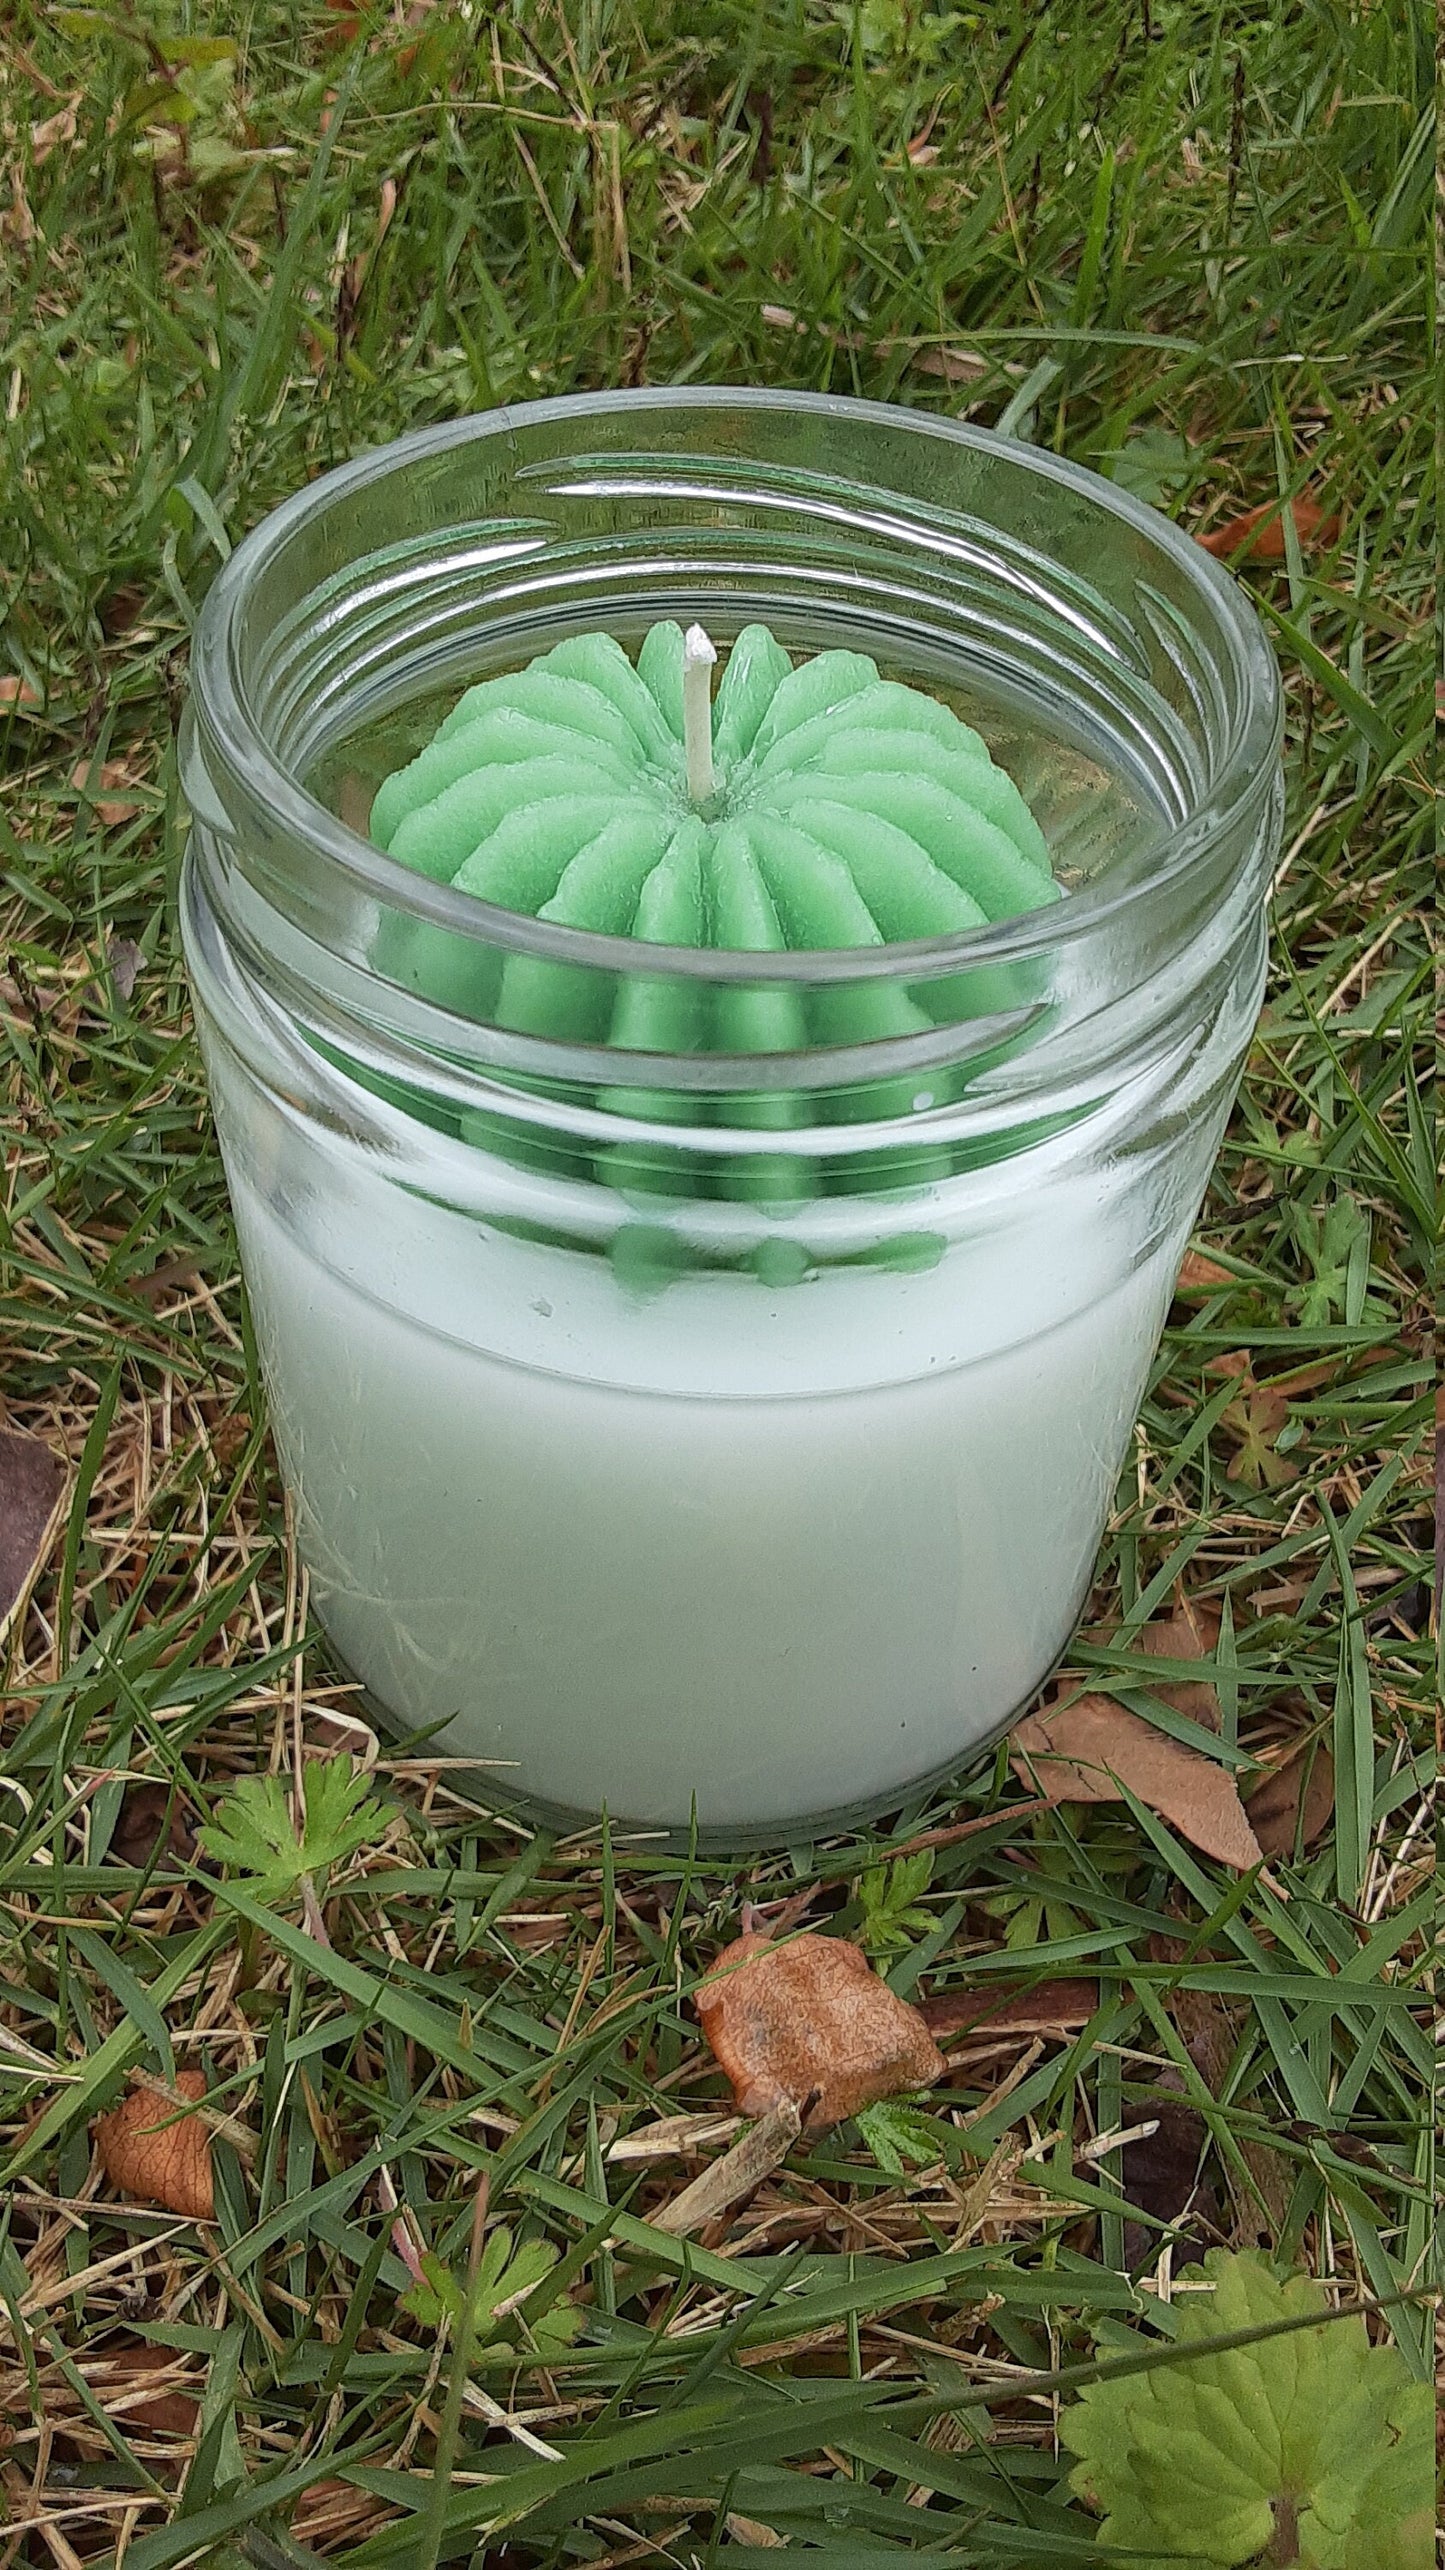 Cactus Flower Jade homemade Candles 8oz and 6oz succulent or cactus candle - spring decor